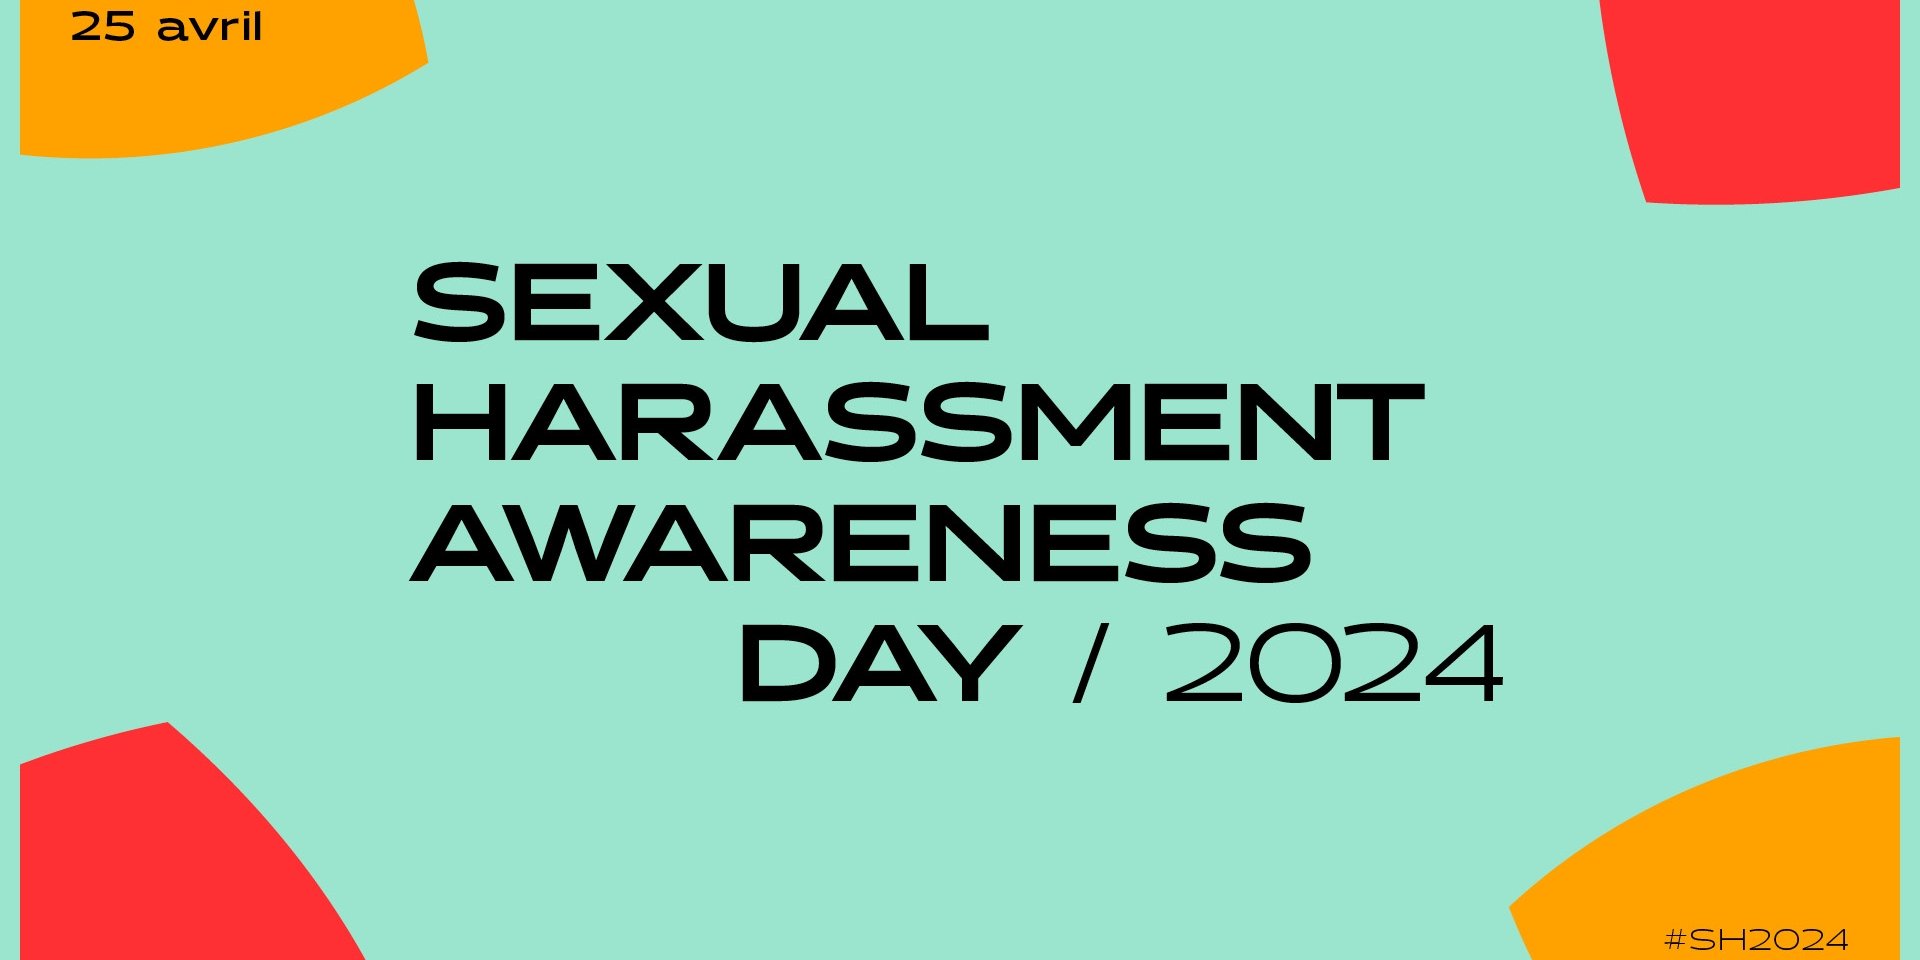 Sexual Harassment awareness day 2024